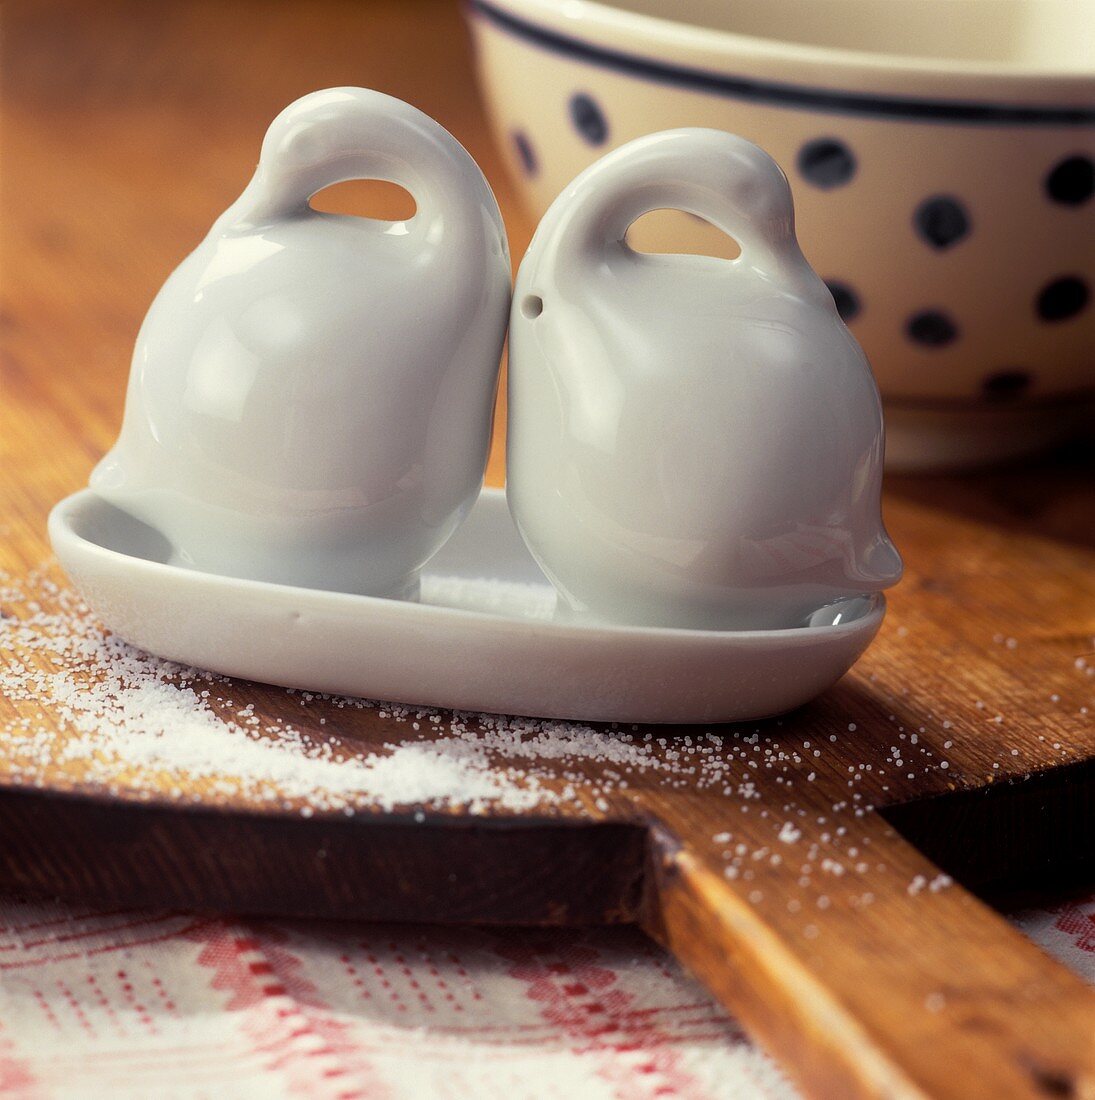 Salt and pepper pots in form of china geese